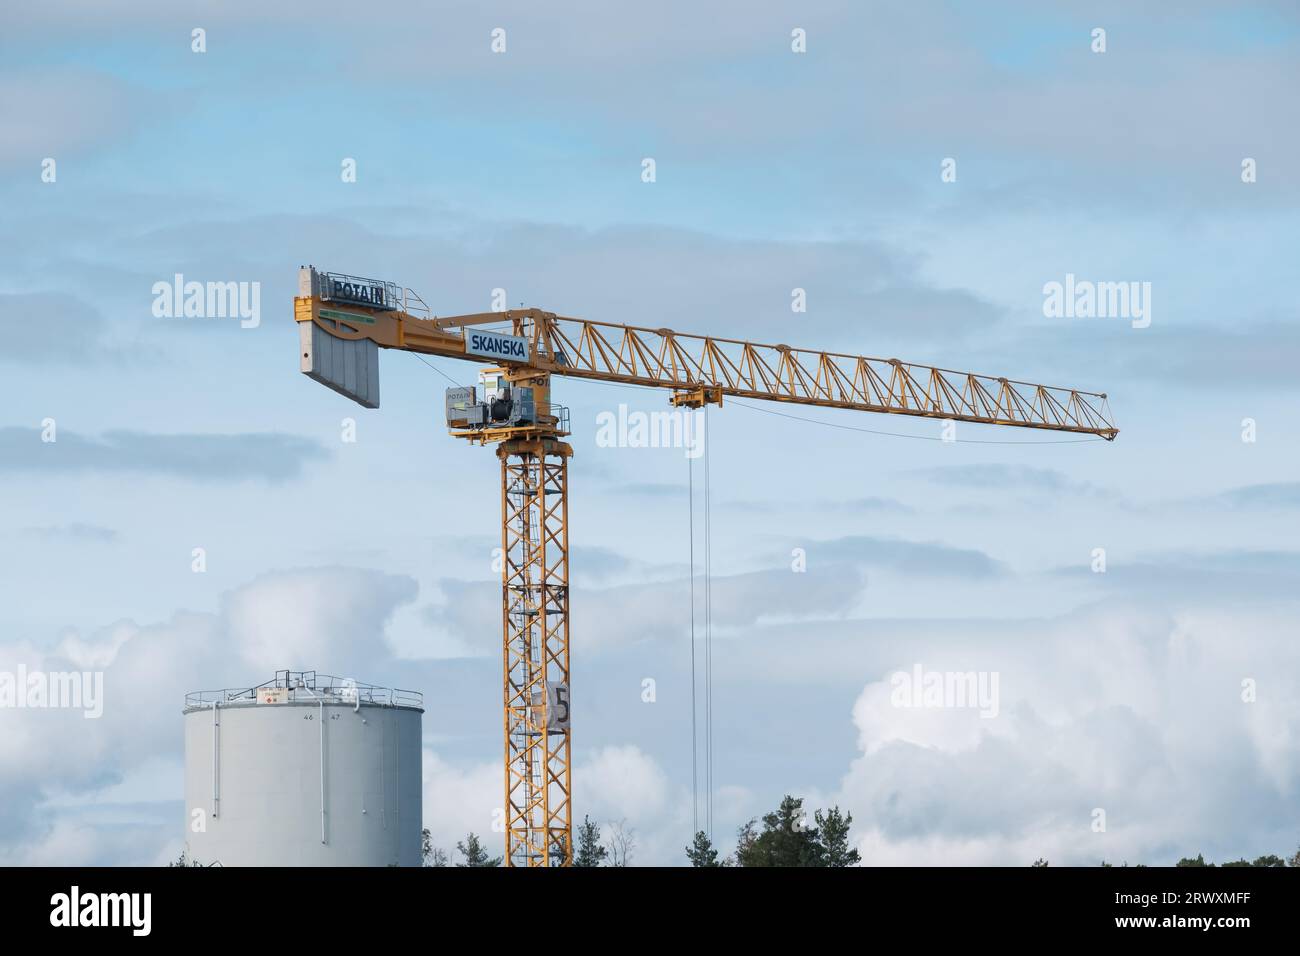 Helsinki / Finland - SEPTEMBER 18, 2023: A construction crane against a bright blue sky. Operated by Swedish multinational construction and developmen Stock Photo